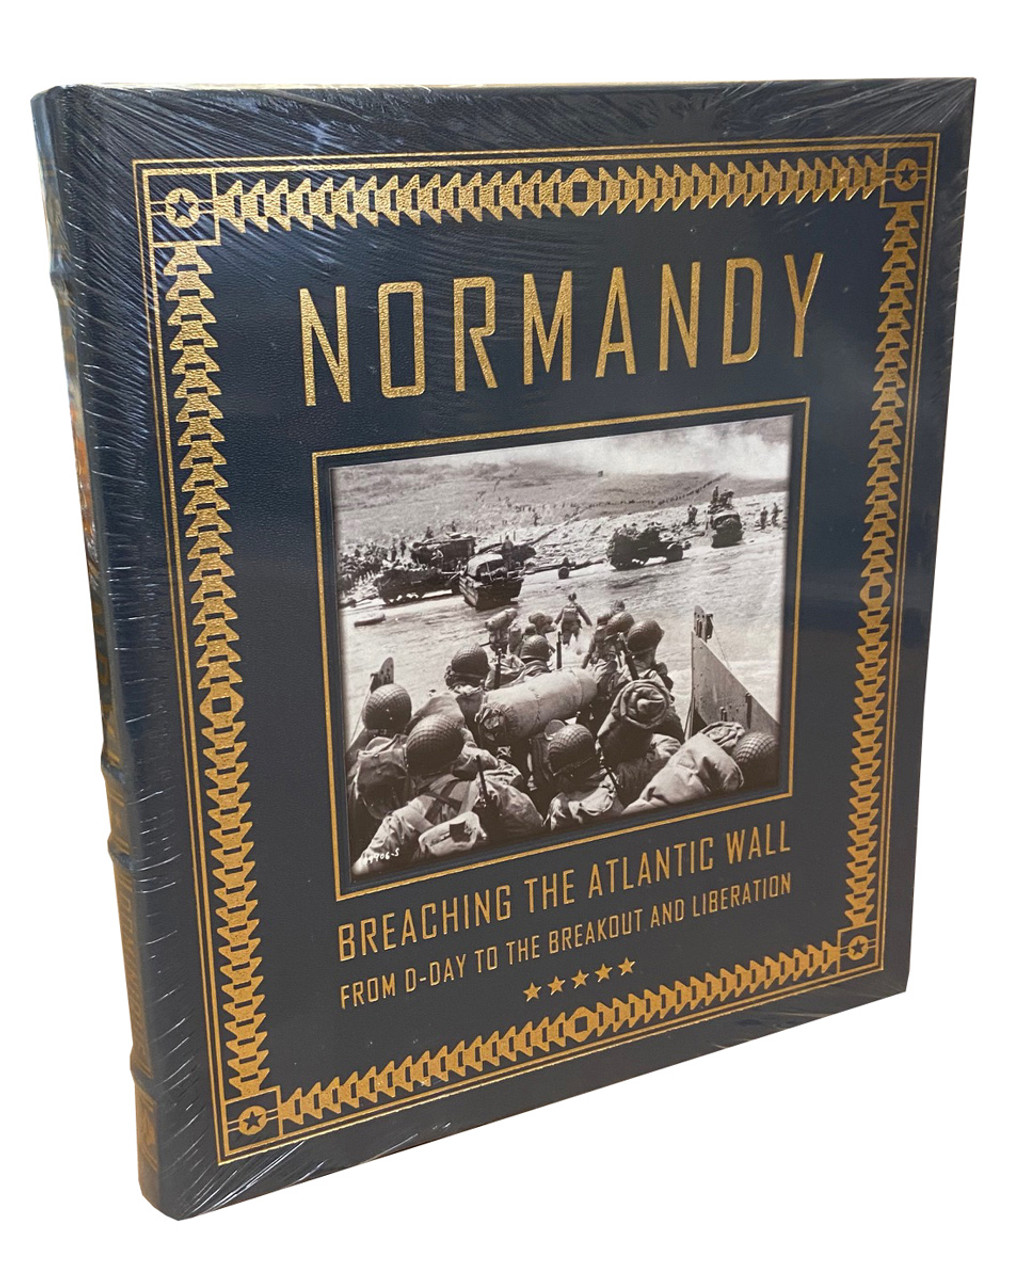 Dominique Francois "NORMANDY: Breaching The Atlantic Wall" Deluxe Limited Edition, Leather Bound Collector's Edition [Sealed]